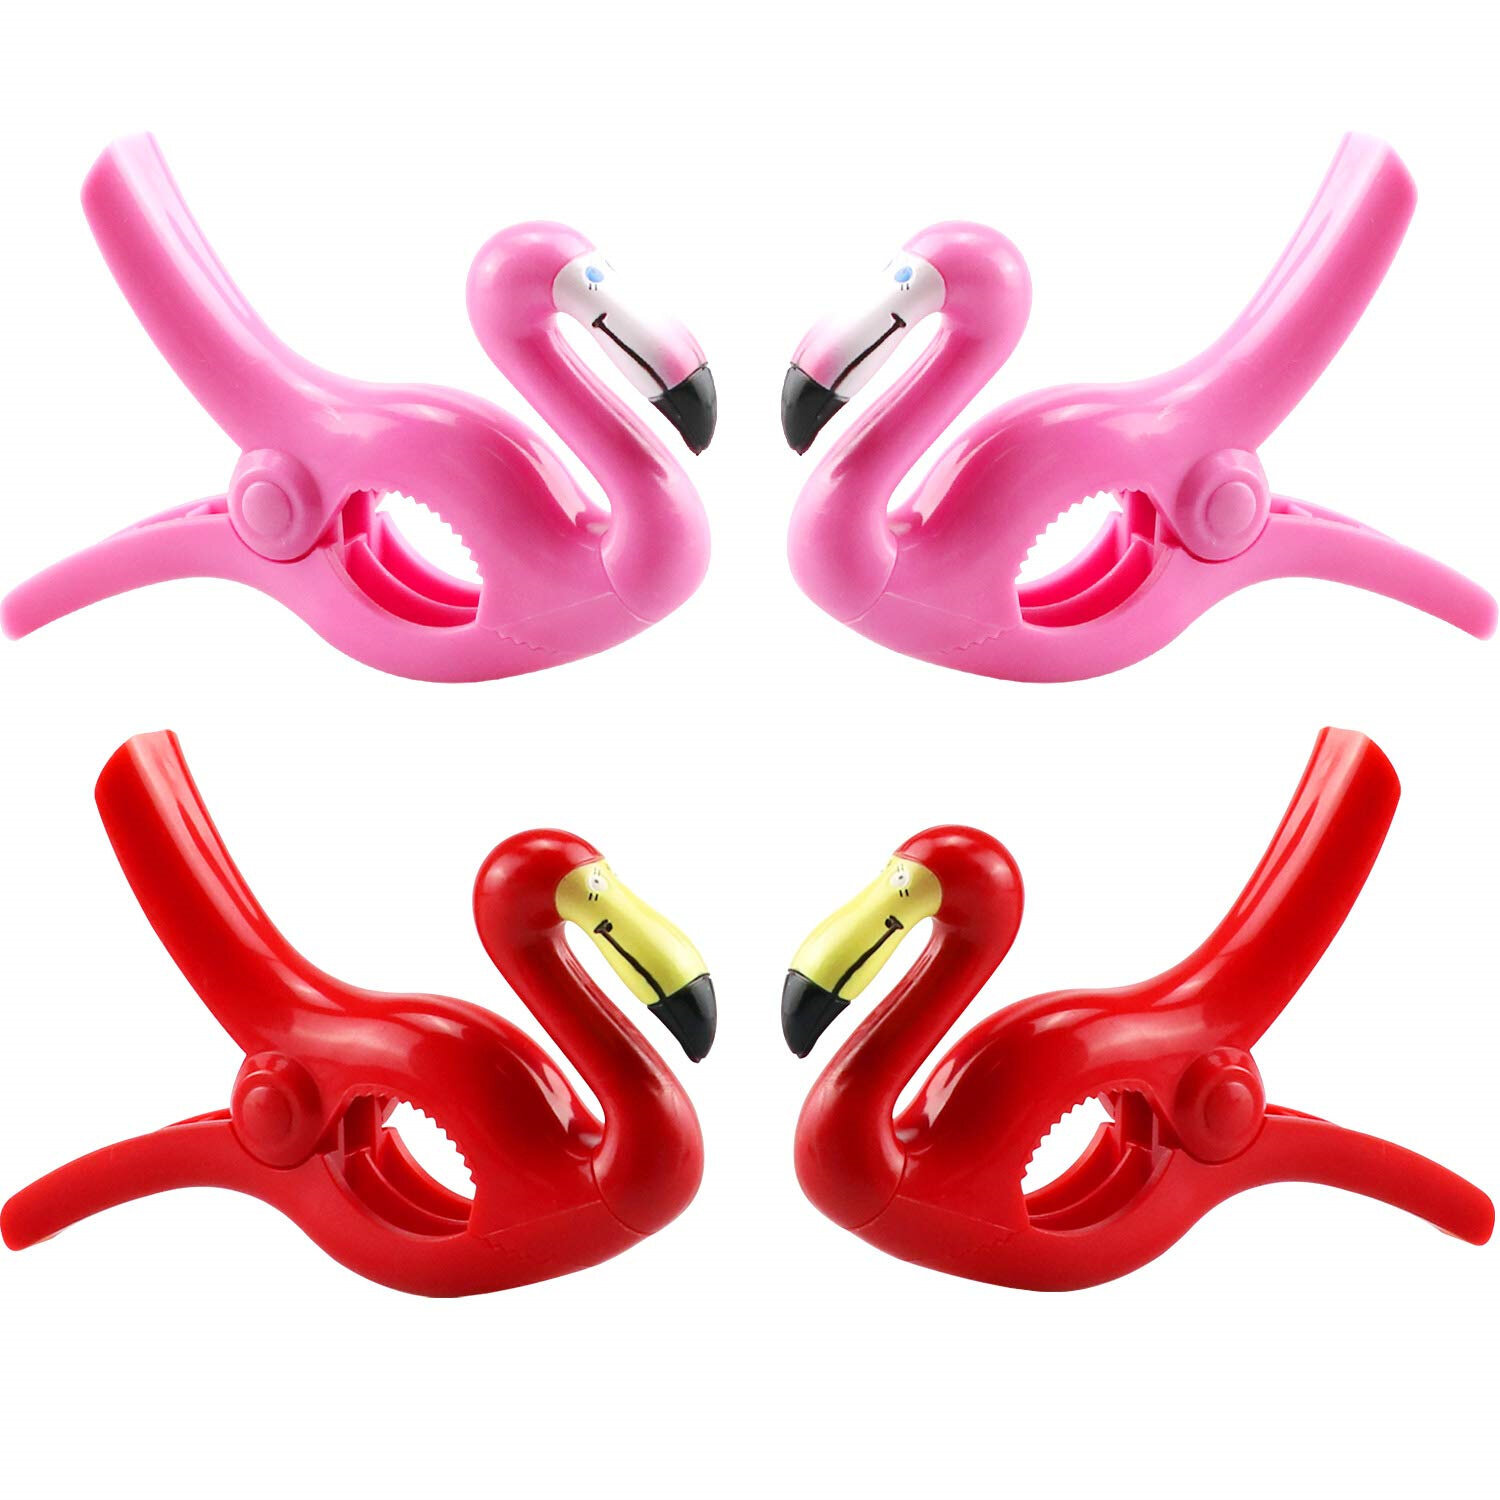 4 Pieces Beach Flamingo Towel Clips Flamingo Chair Holders Portable Parrot Towel Holders for Holiday Pool